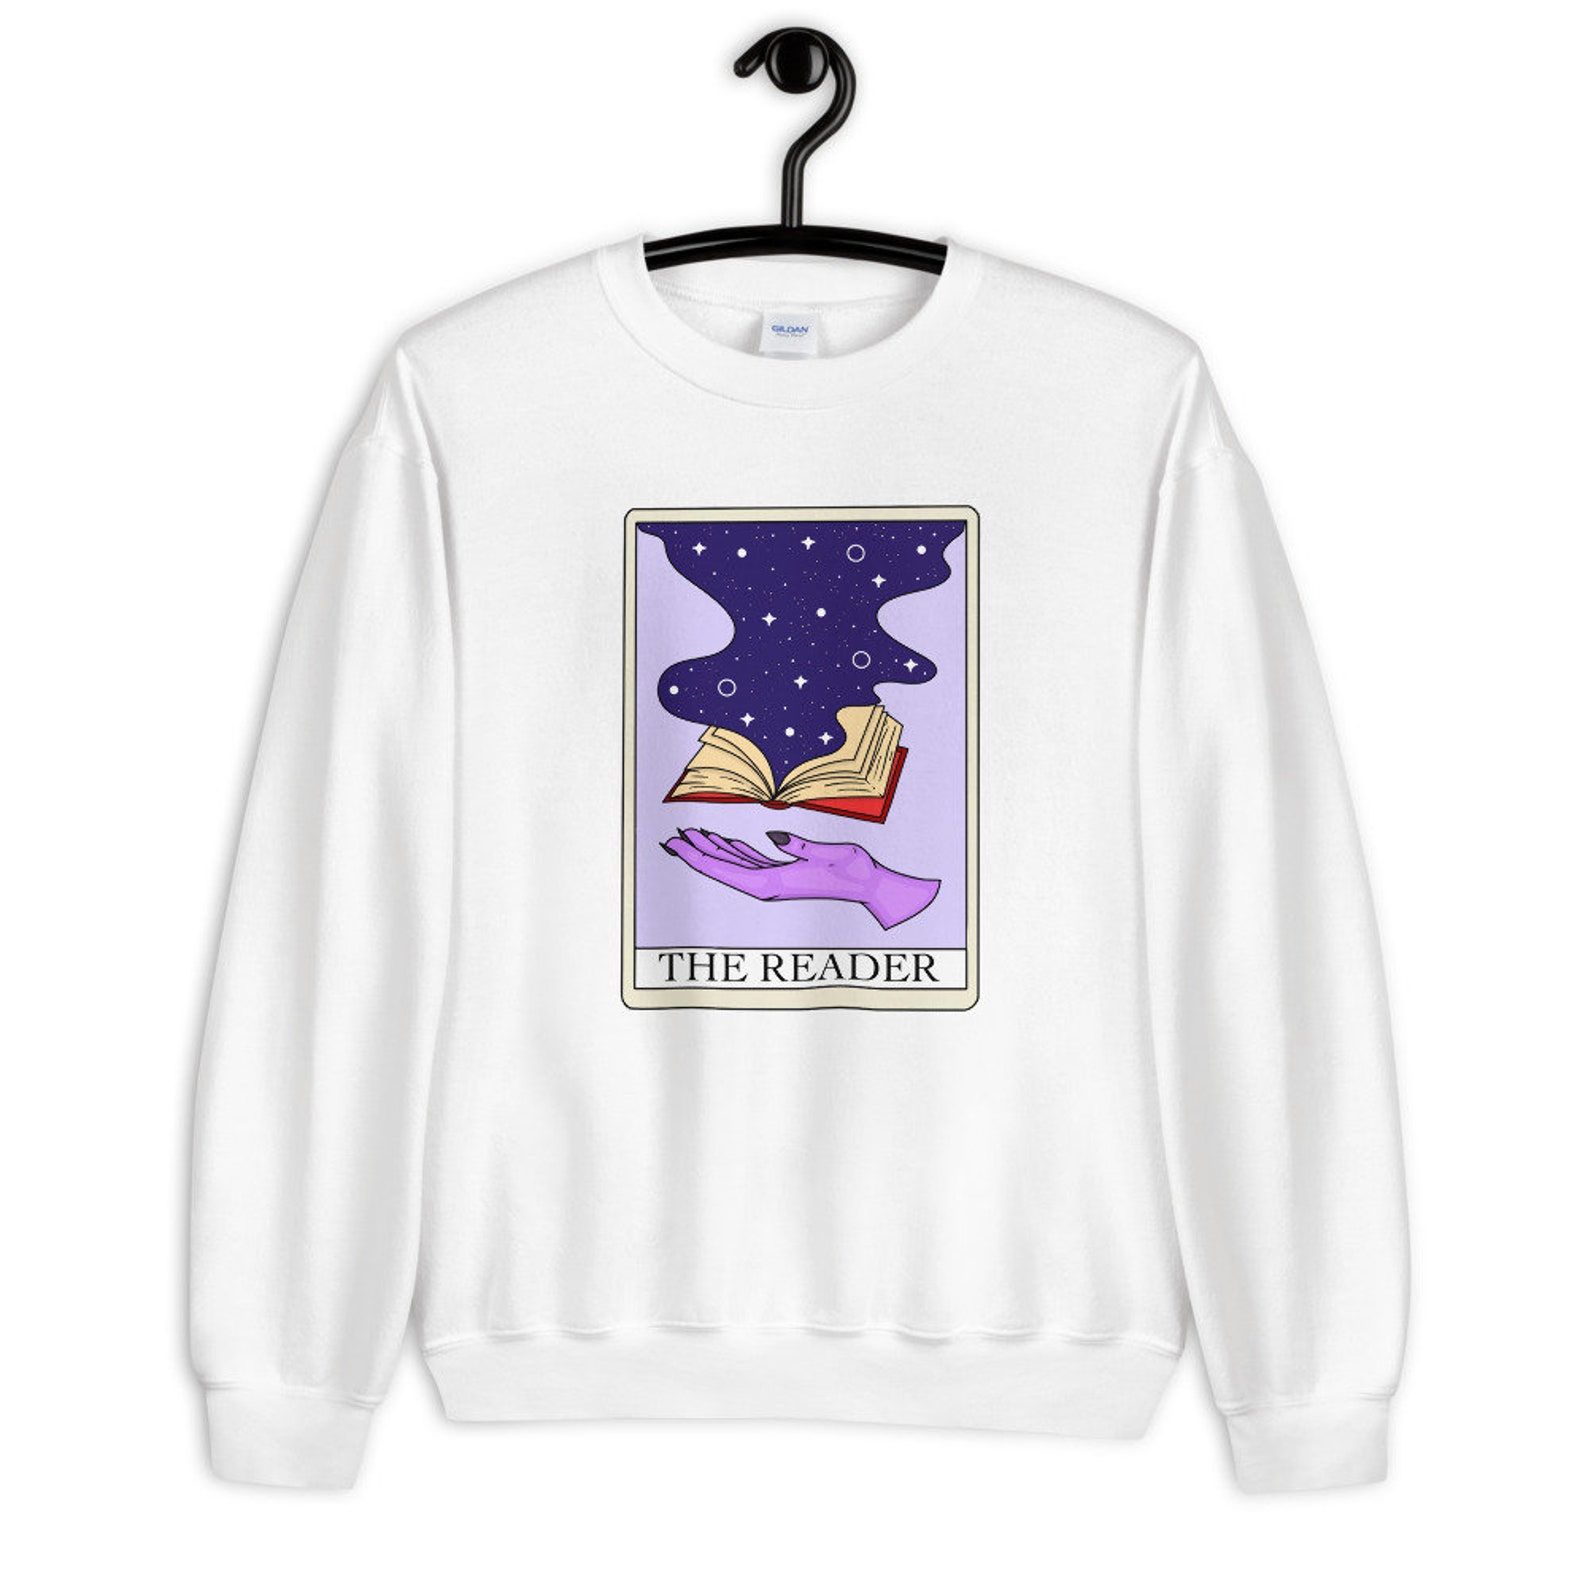 Image of a white sweatshirt with a purple tarot card in the middle. The card features a hand and a book and is titled 